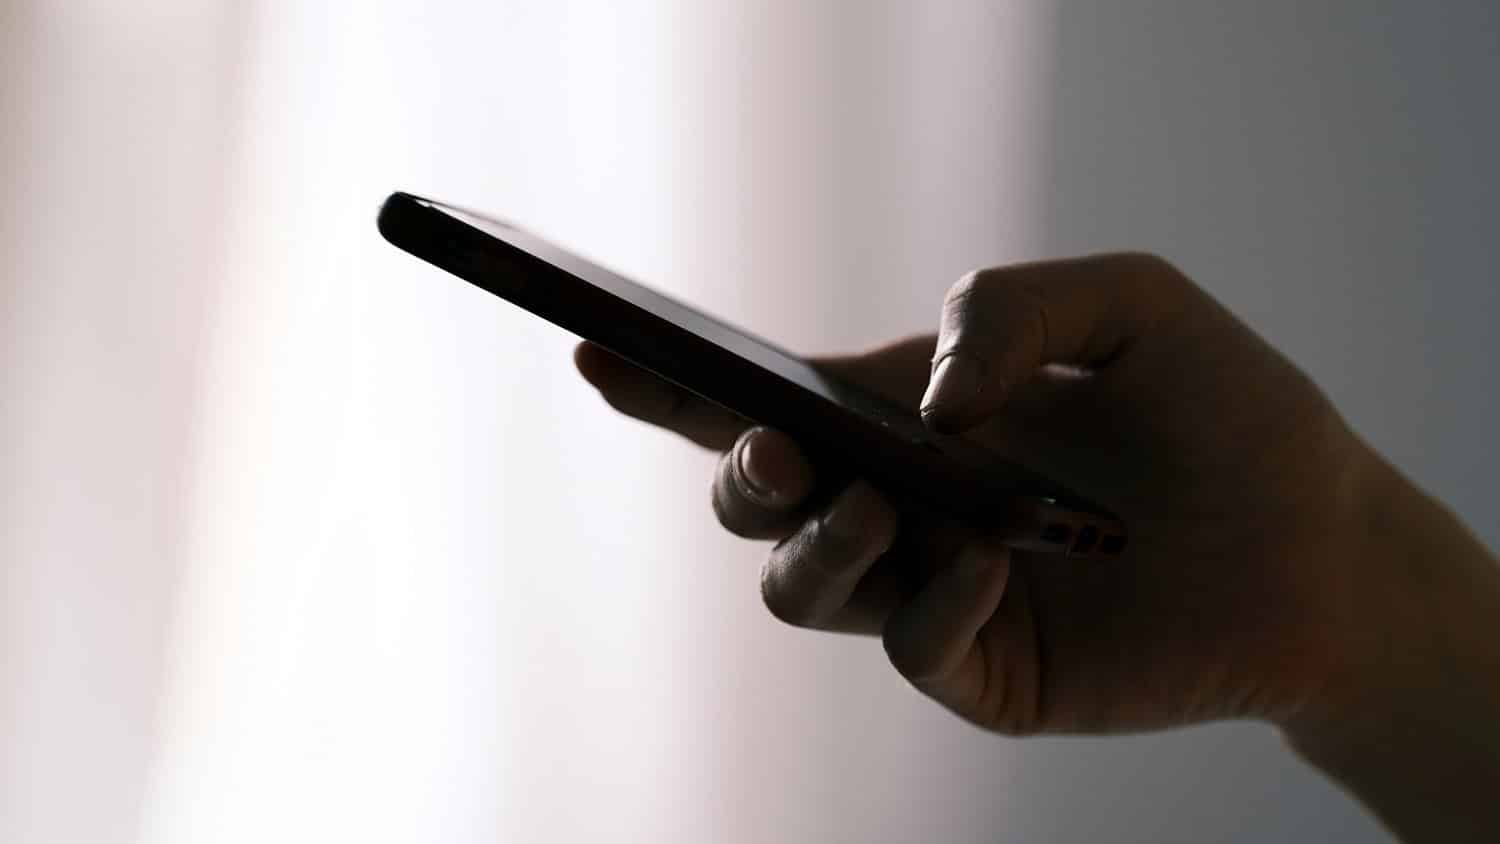 image shows a hand holding a smartphone in silhouette